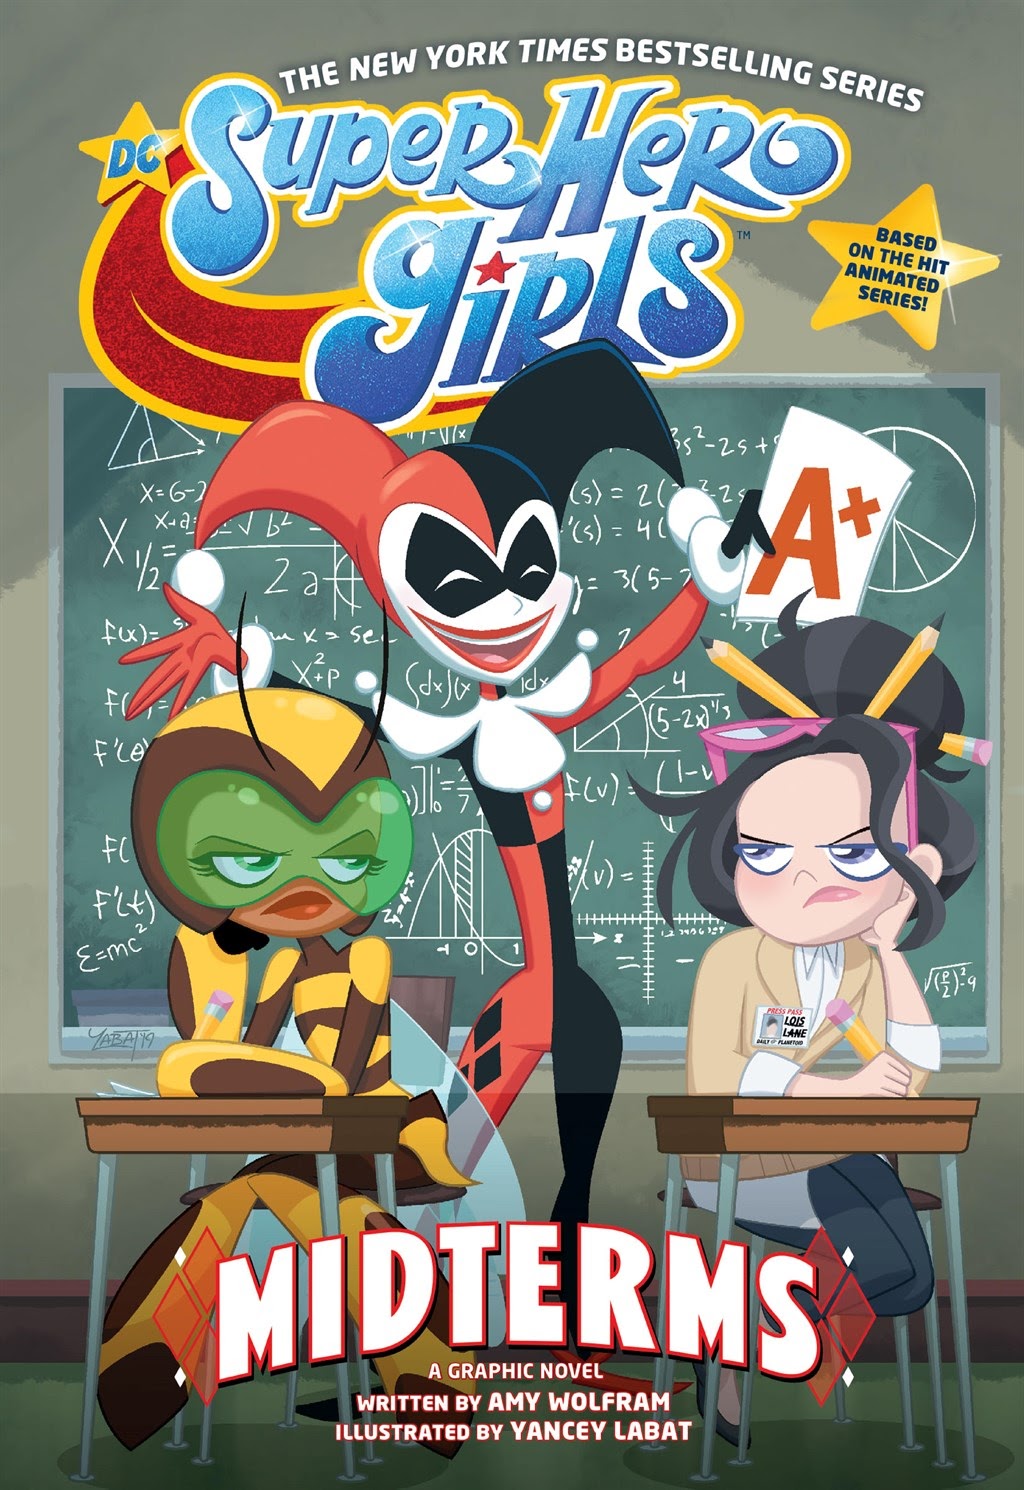 Read online DC Super Hero Girls: Midterms comic -  Issue # TPB - 1